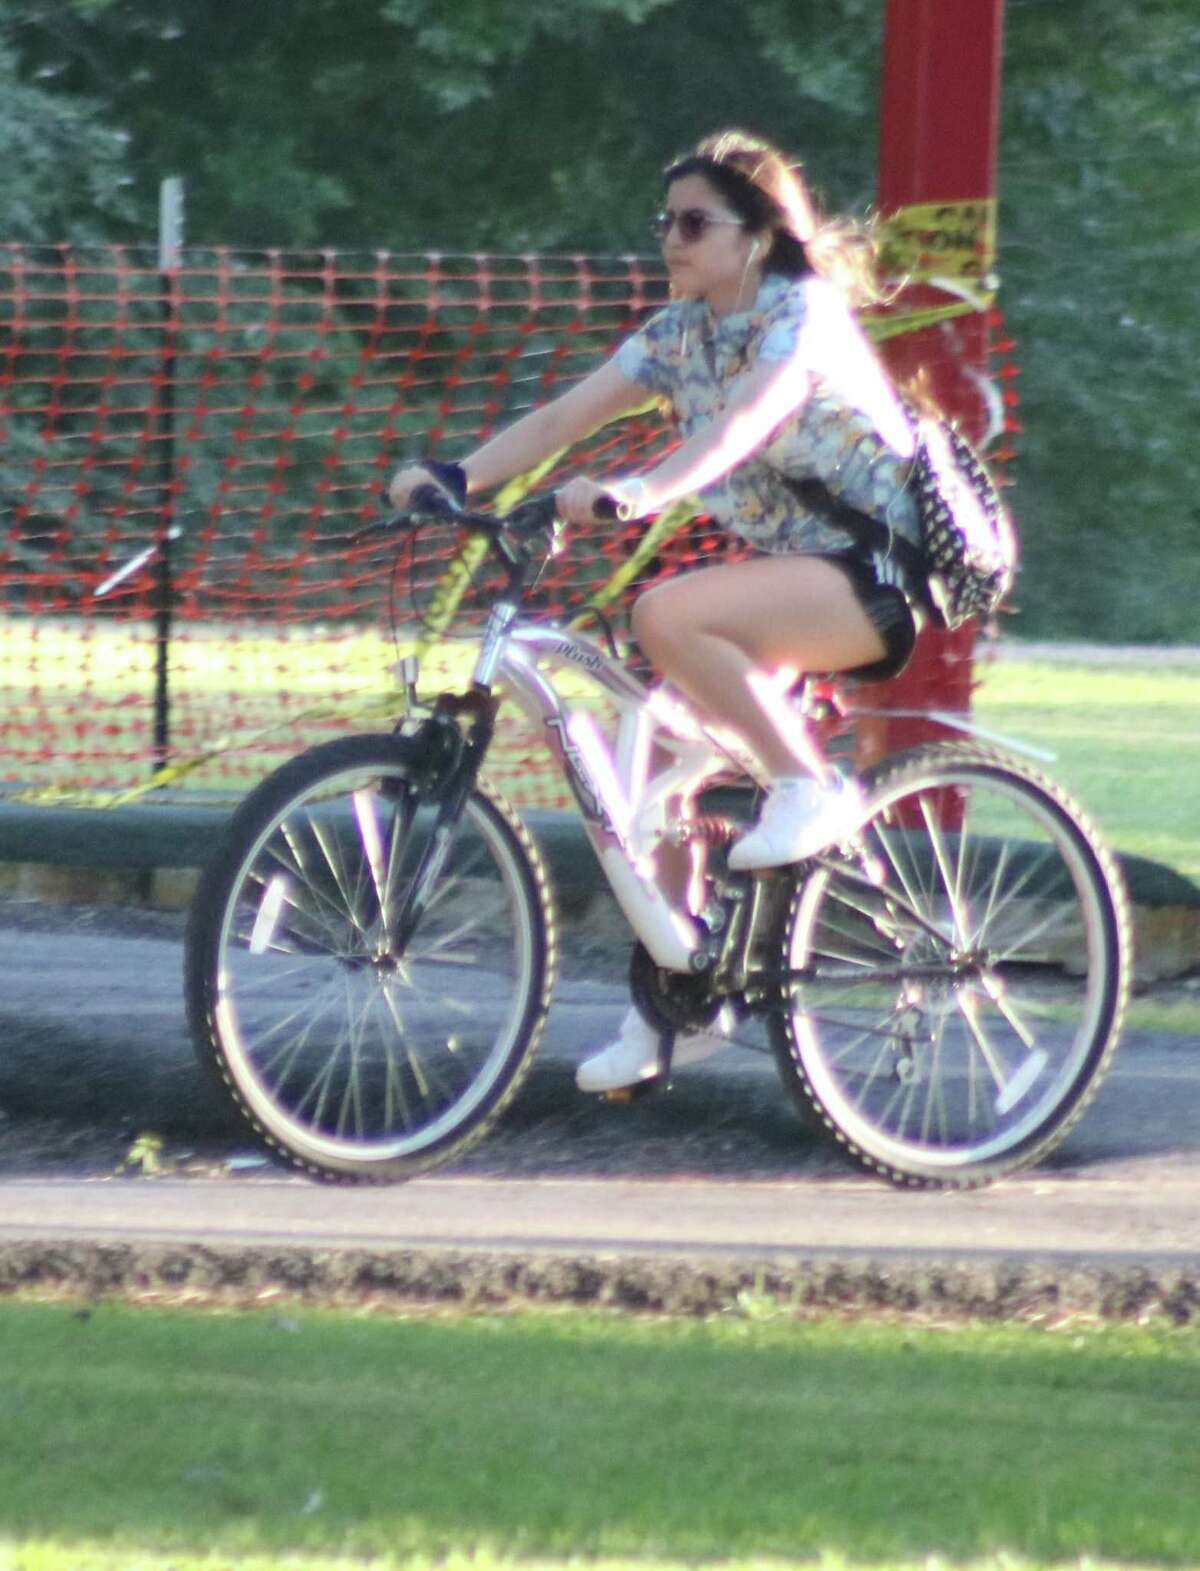 In honor of National Bicycle Safety Month, we notice this cyclist has reflectors on her spokes, but those ear pieces are probably a bad idea.